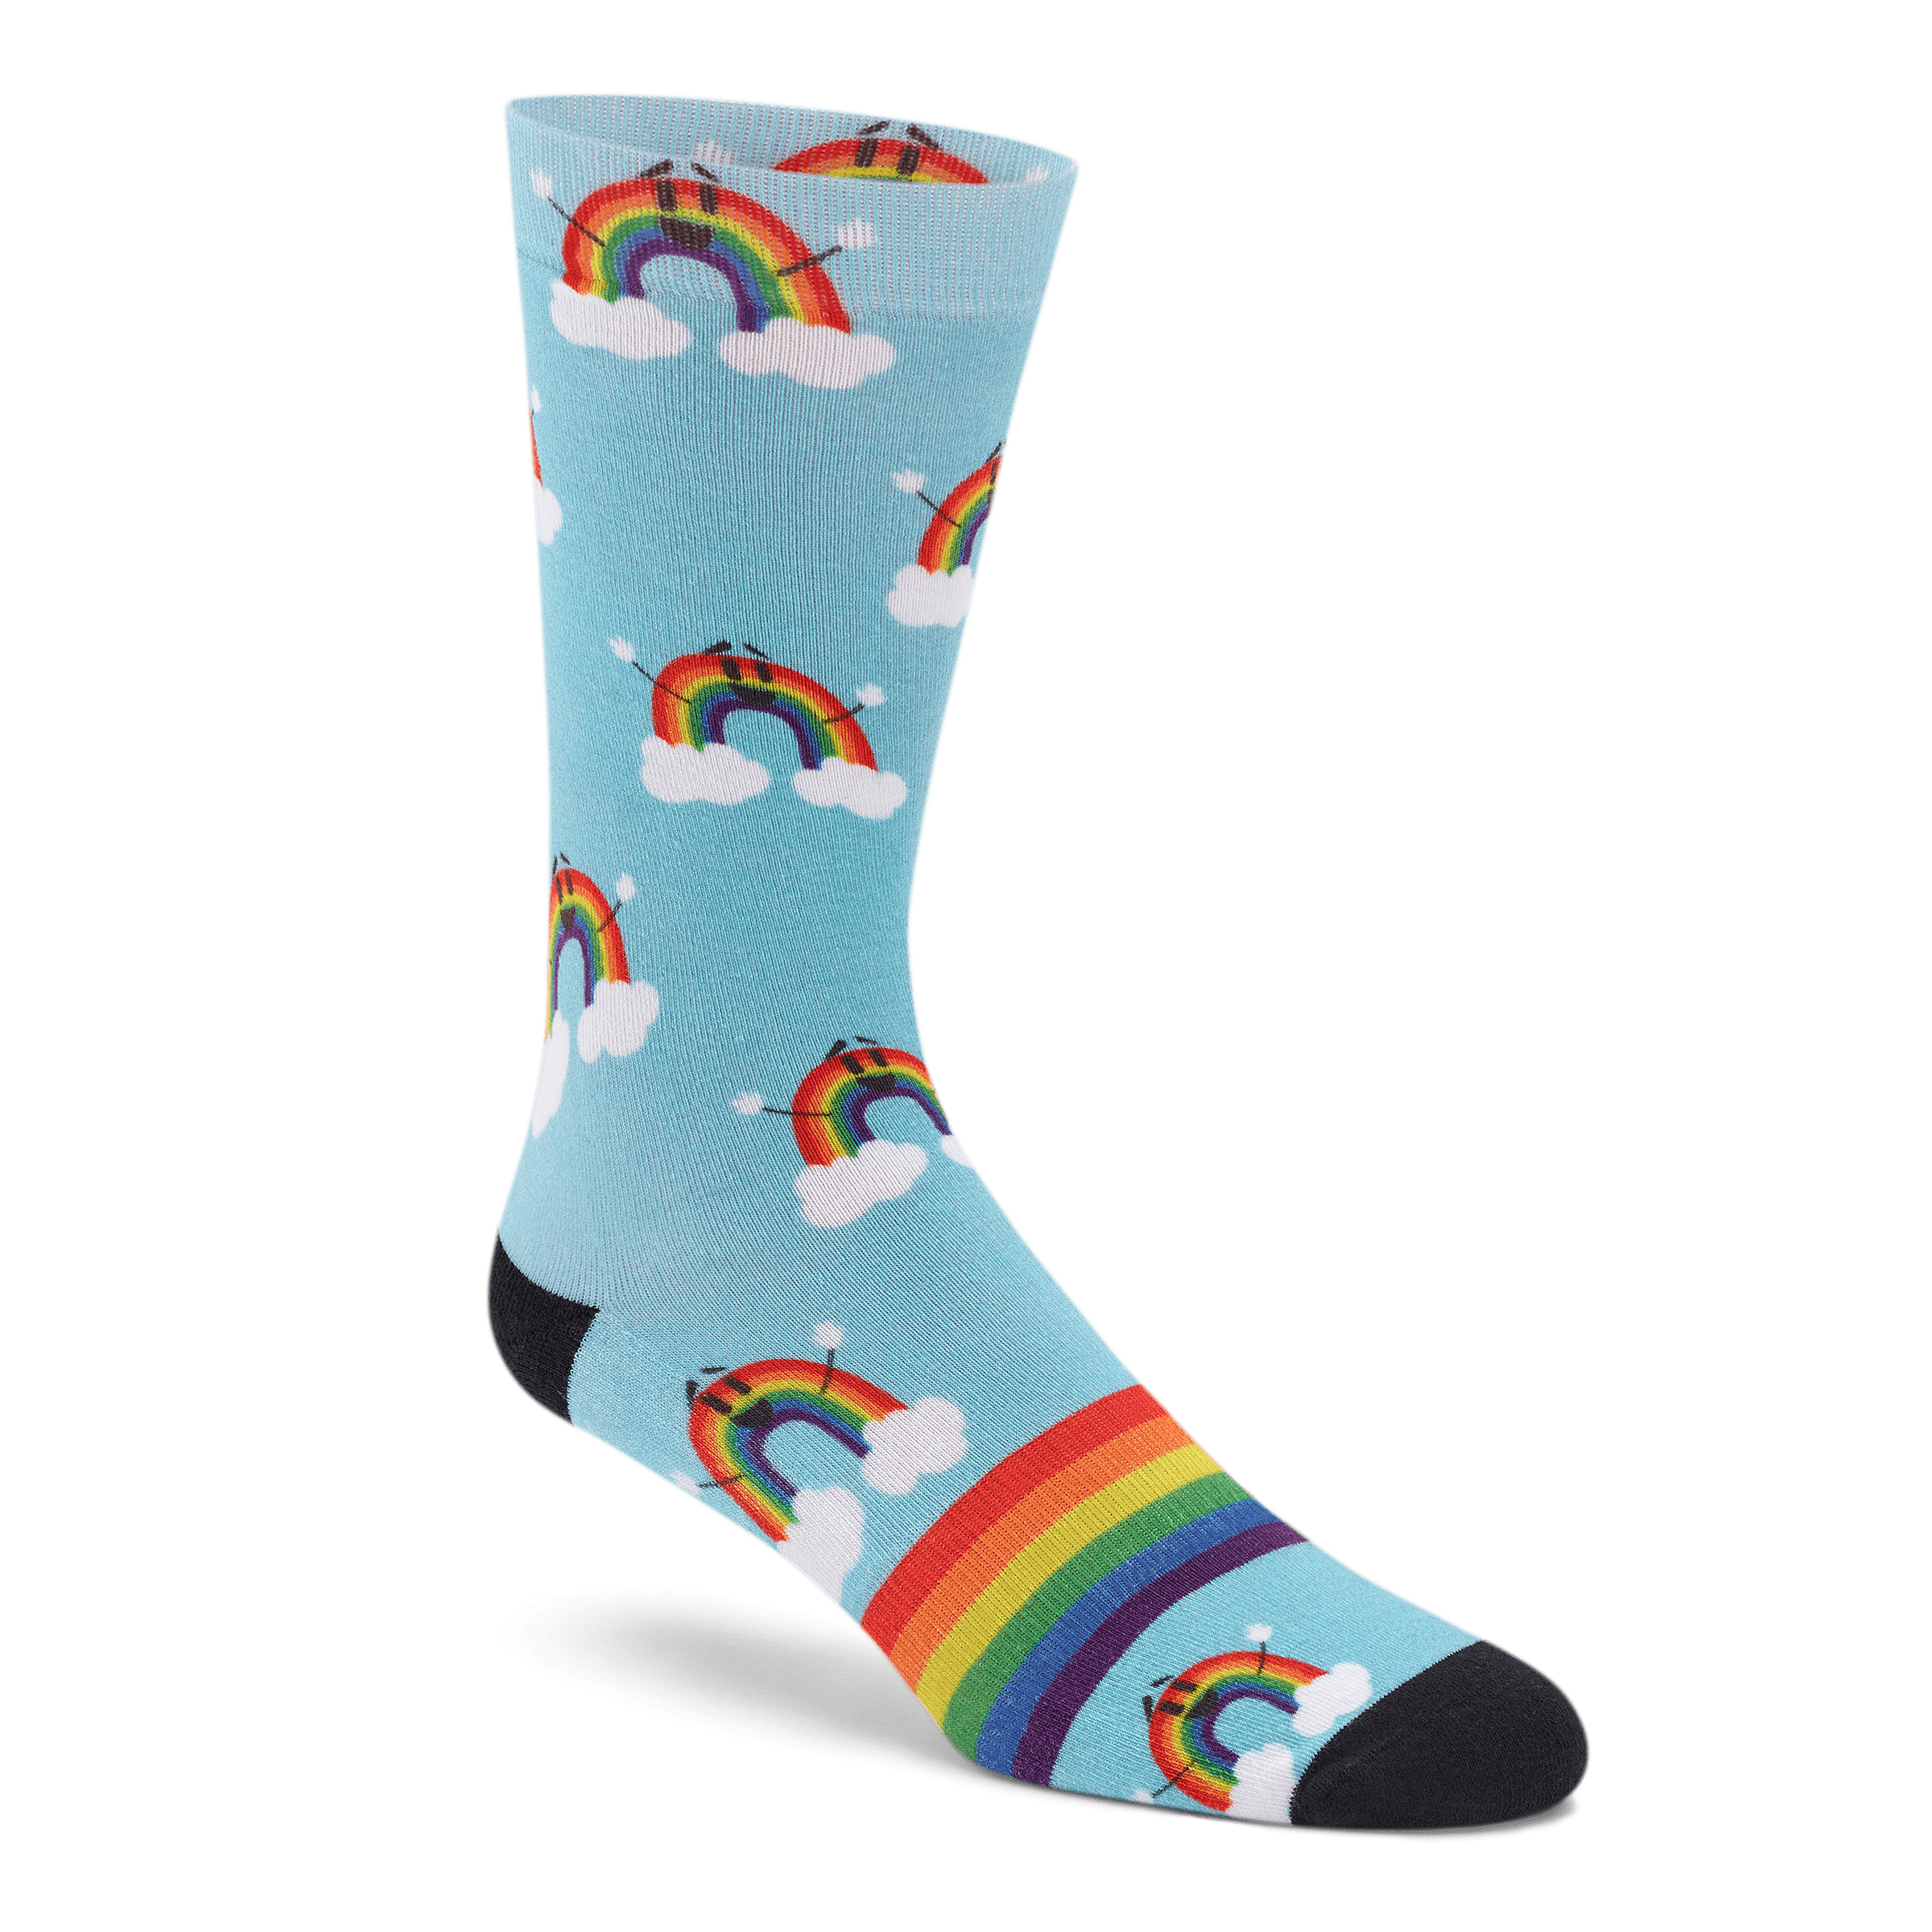 Sock Hate And Save Young Lives With Nice Cotton Socks